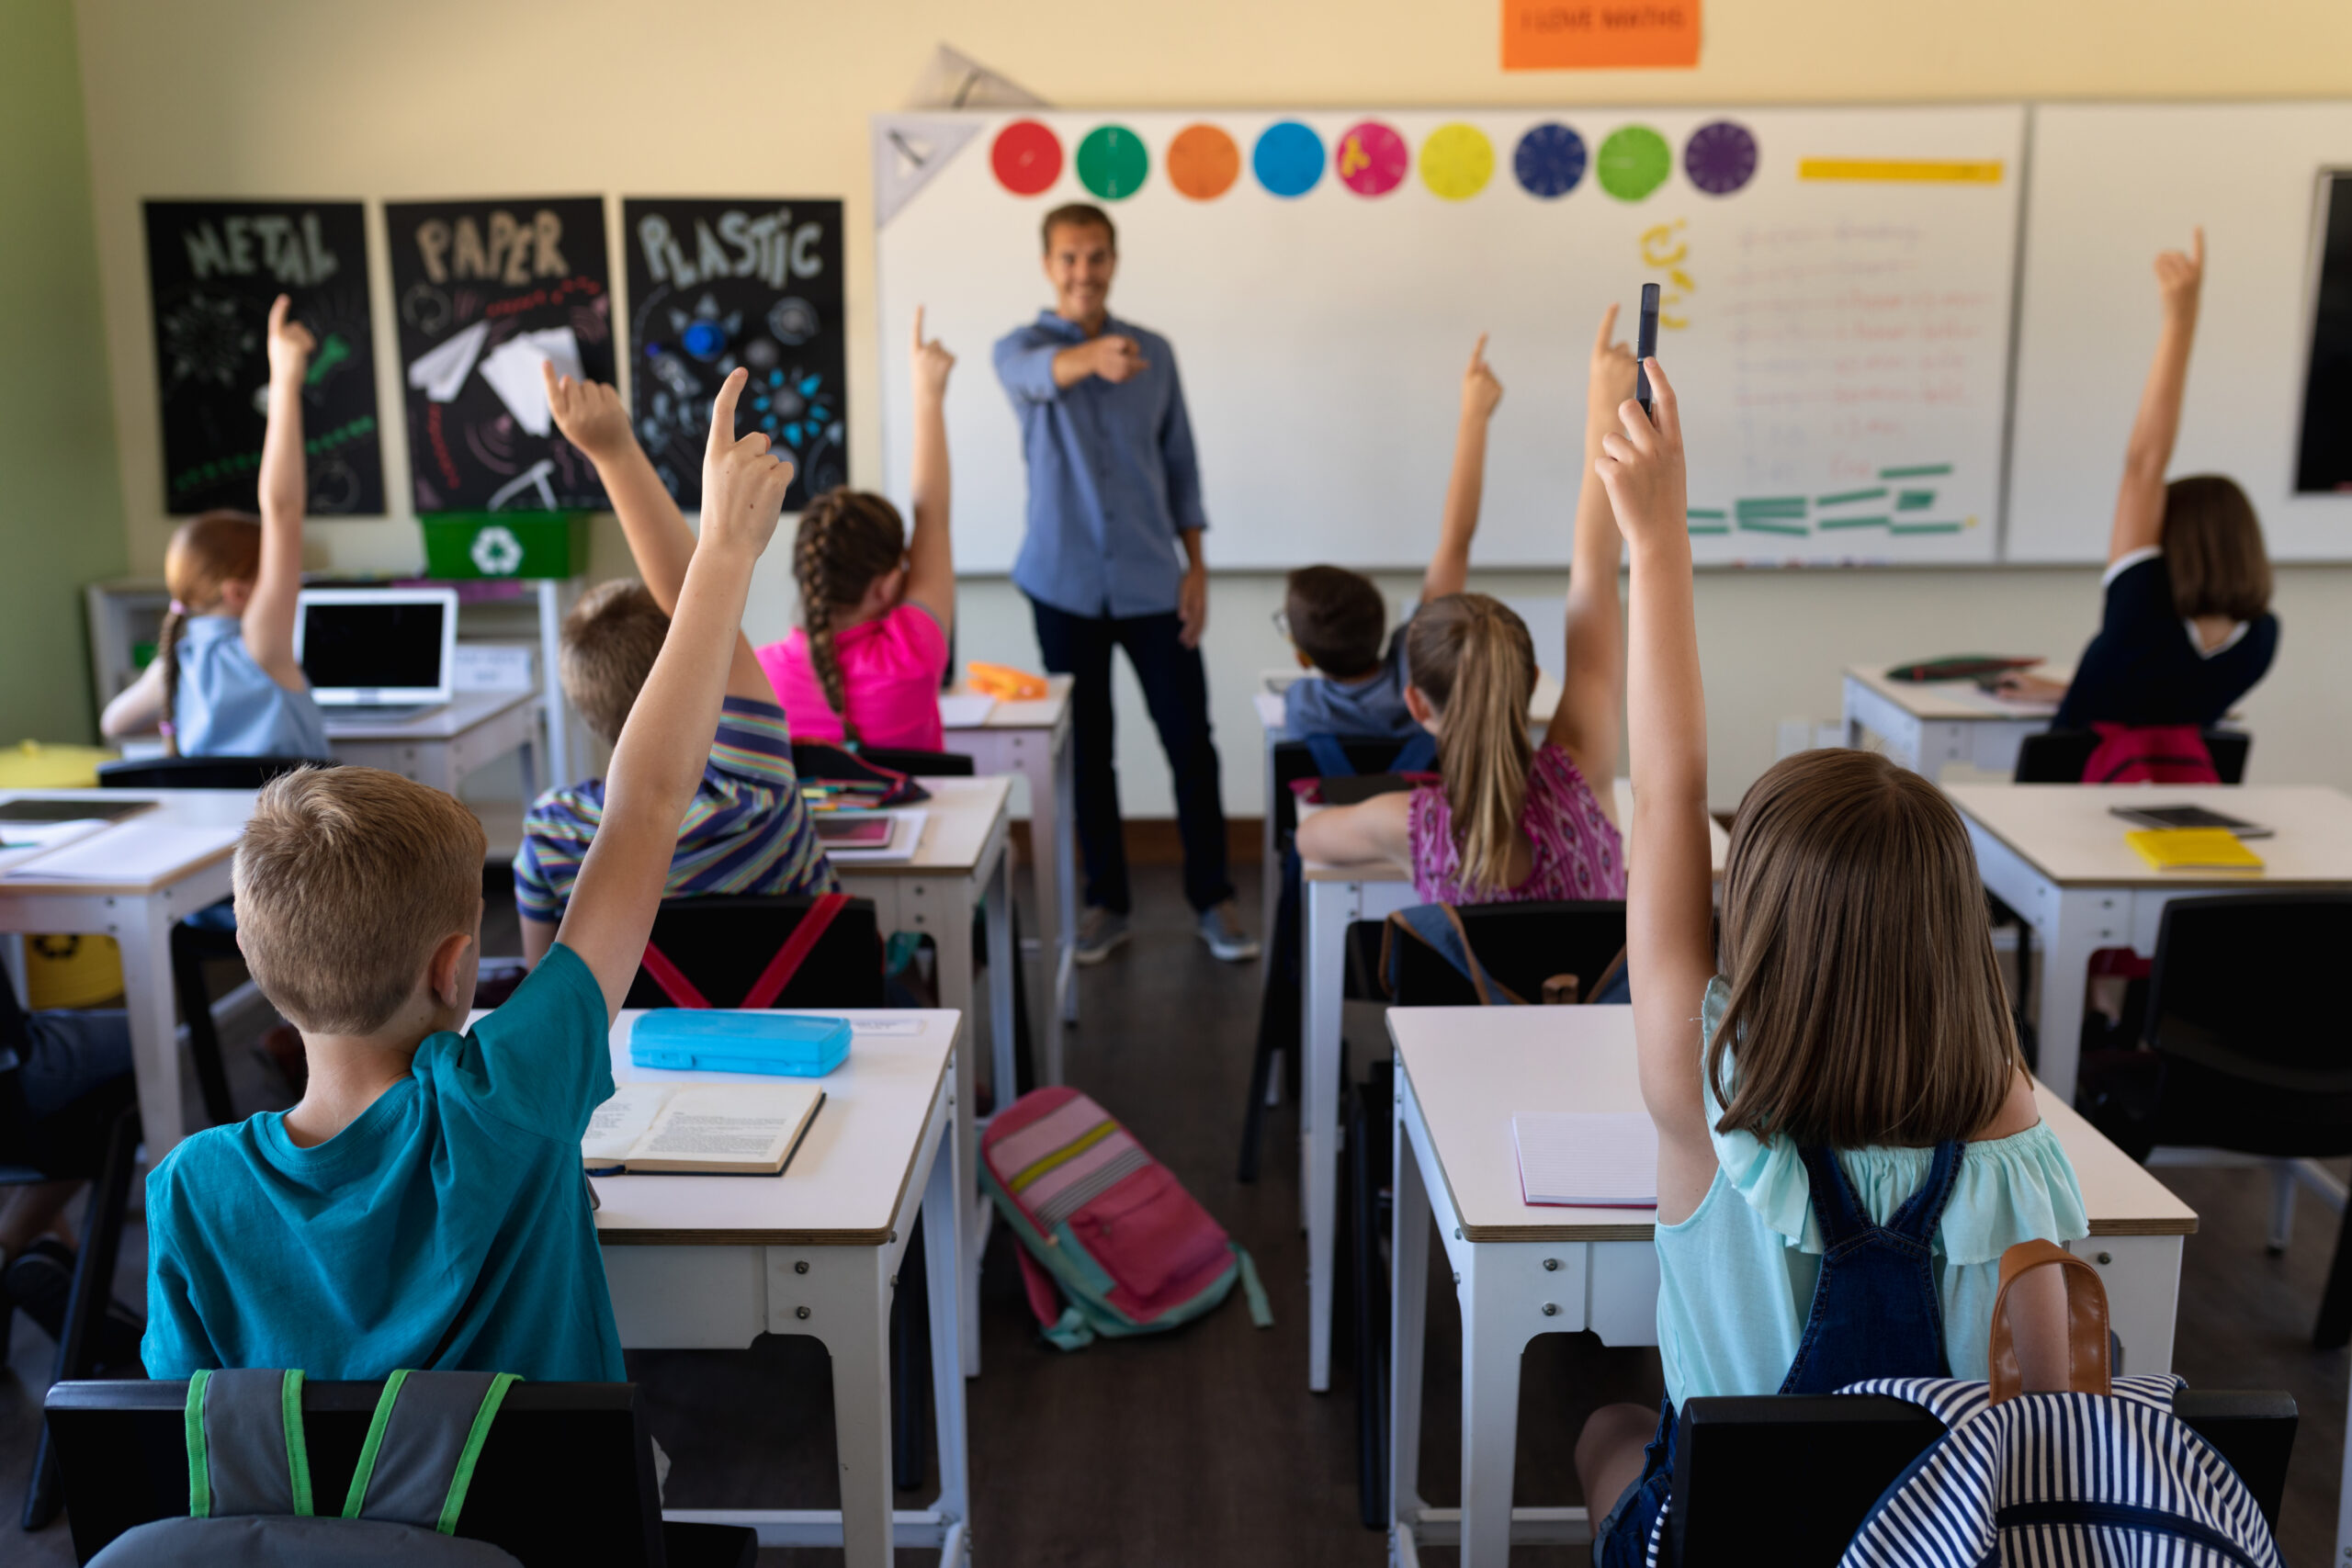 Front view of a Caucasian male school teacher standing in front of a diverse group of school children sitting at desks and raising their hands to answer a question during a lesson in an elementary school classroom, the teacher pointing to one of them to an